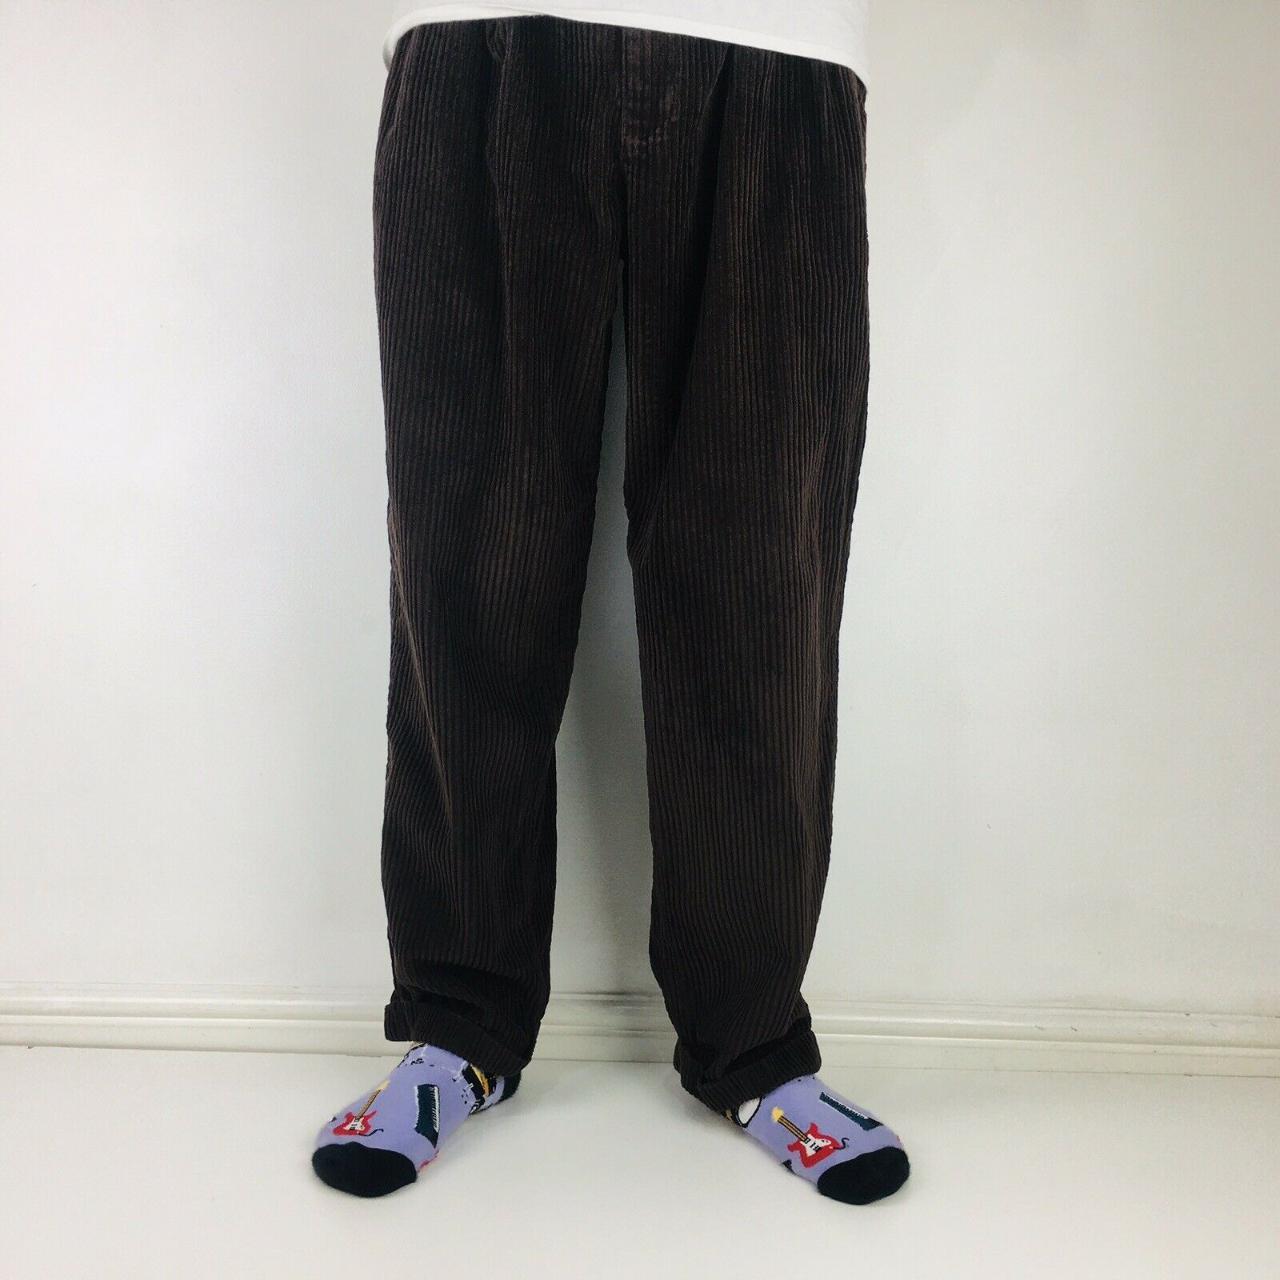 Product Image 2 - Vintage Corduroy Trousers 

Brand: Clubroom

Cuffed

Great